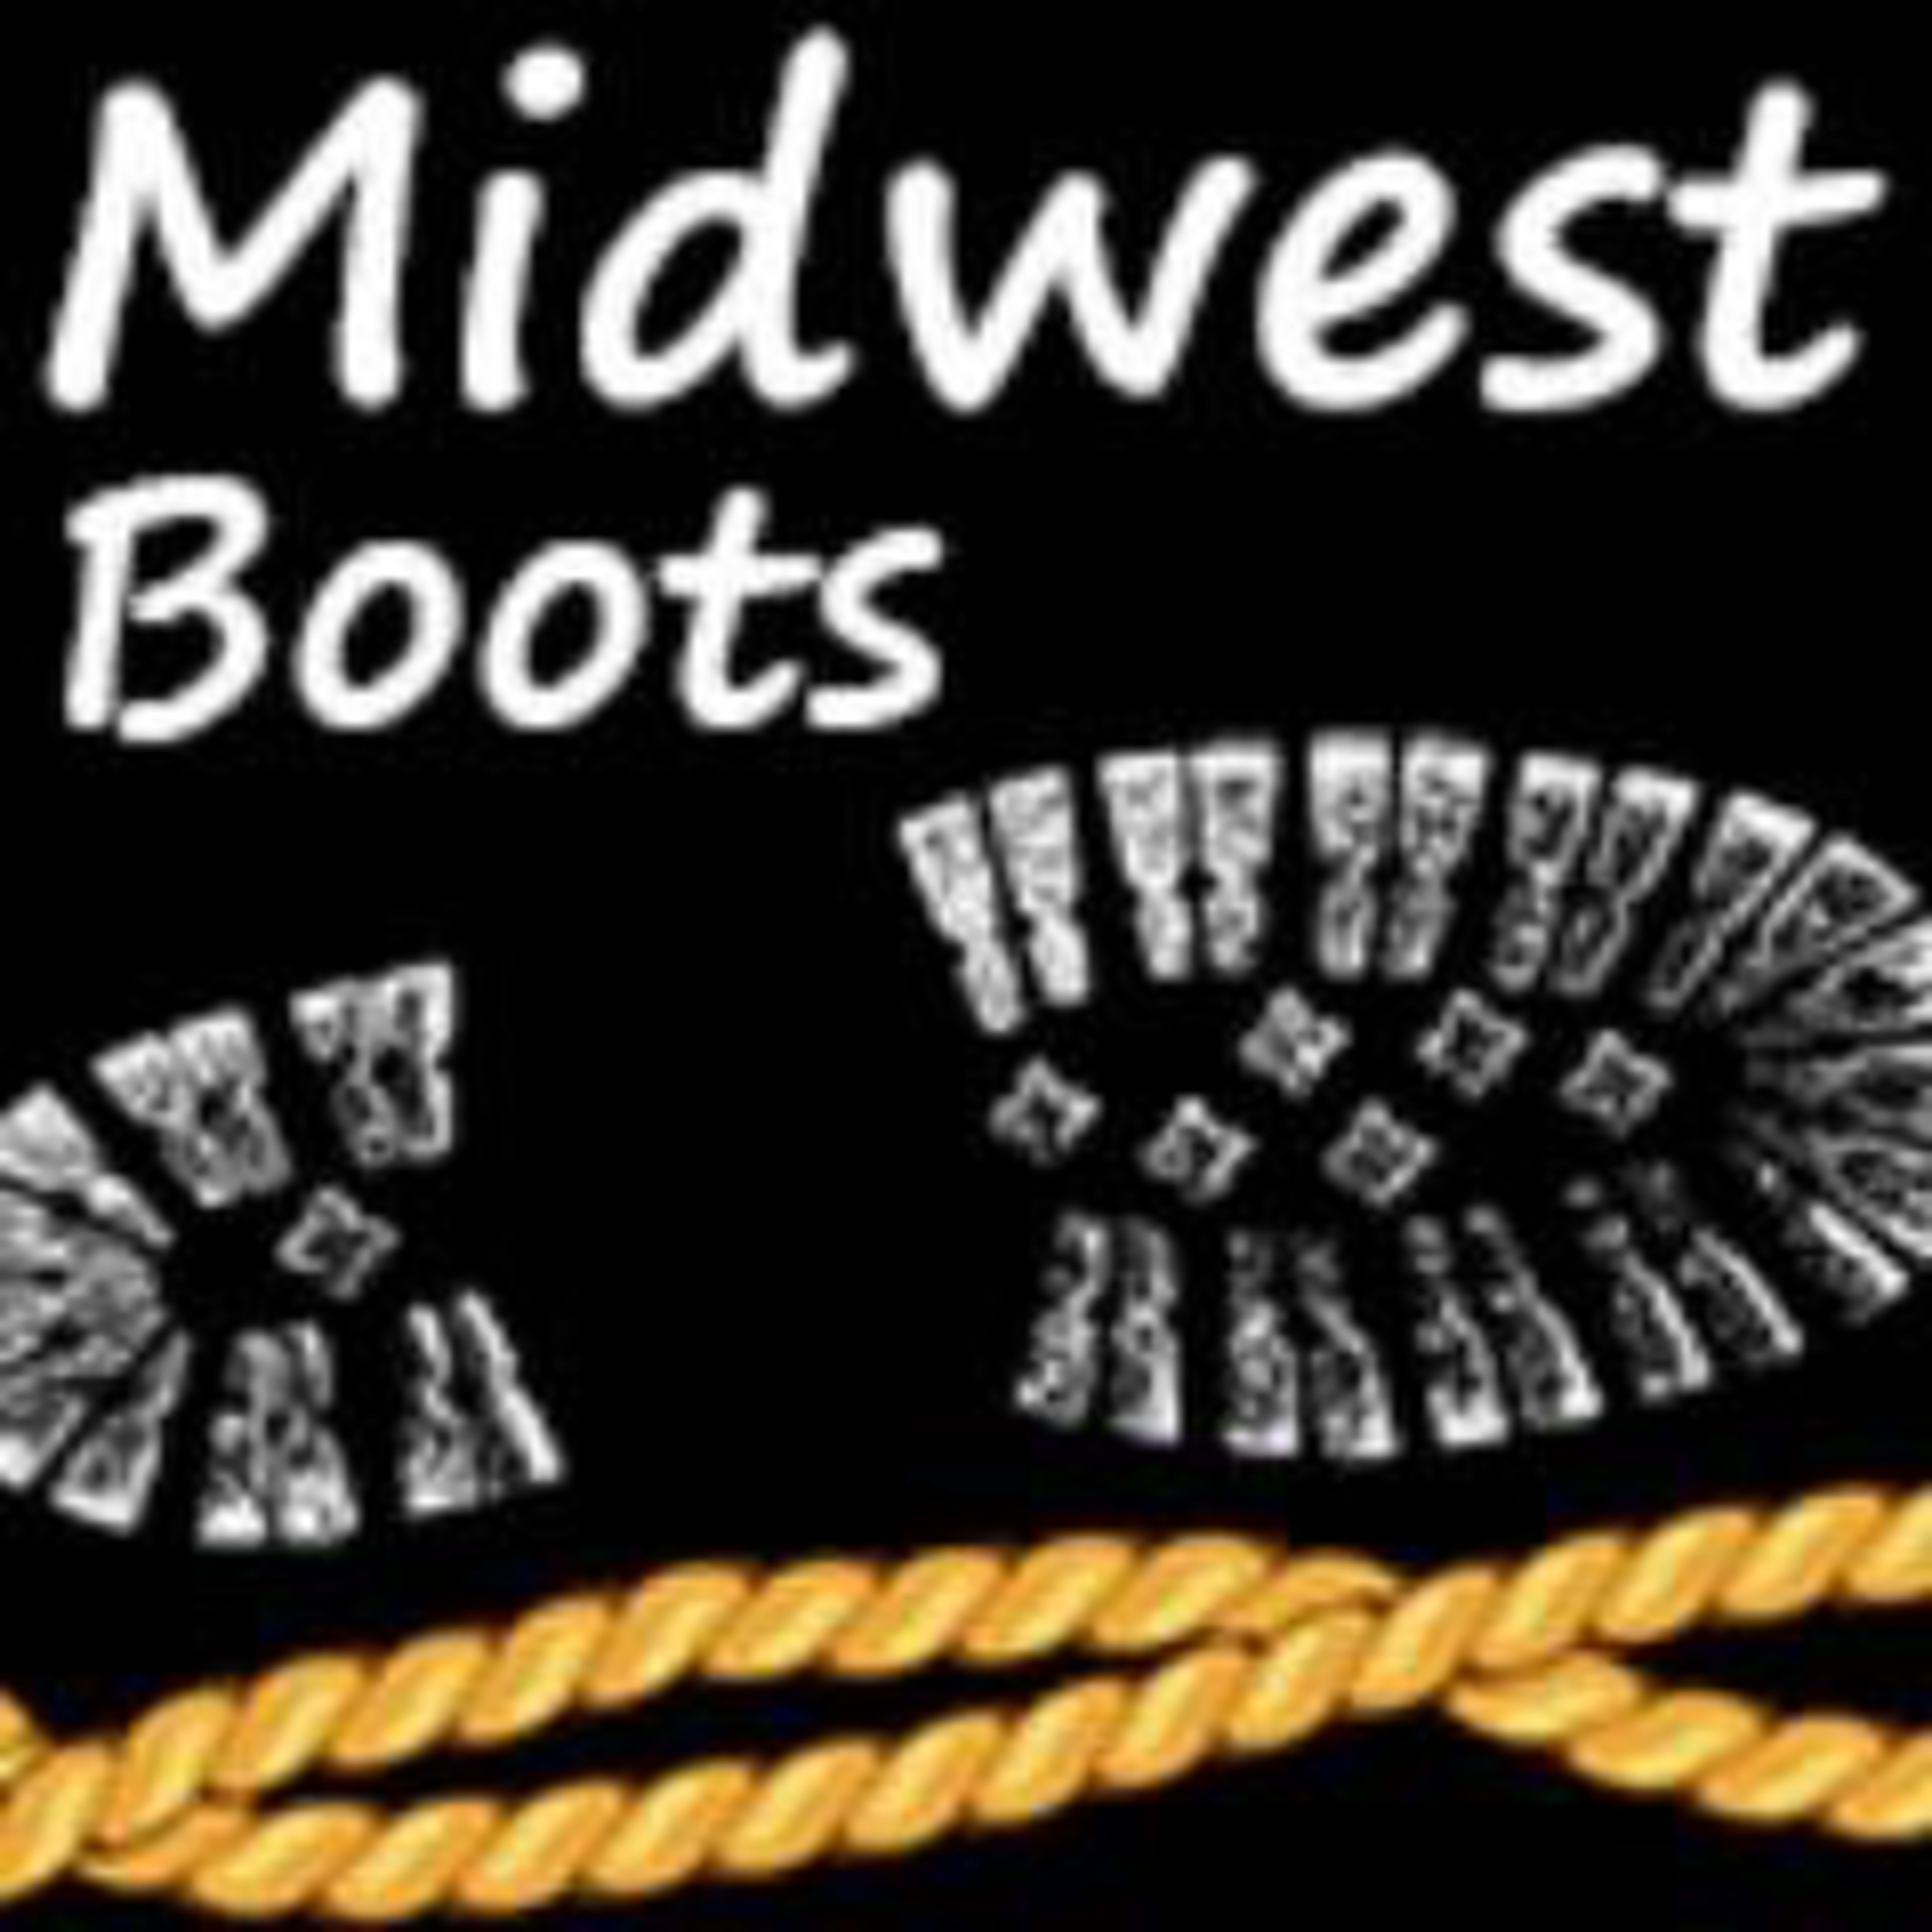 Midwestboots.com COUPON CODES - $45 for Aug 2023